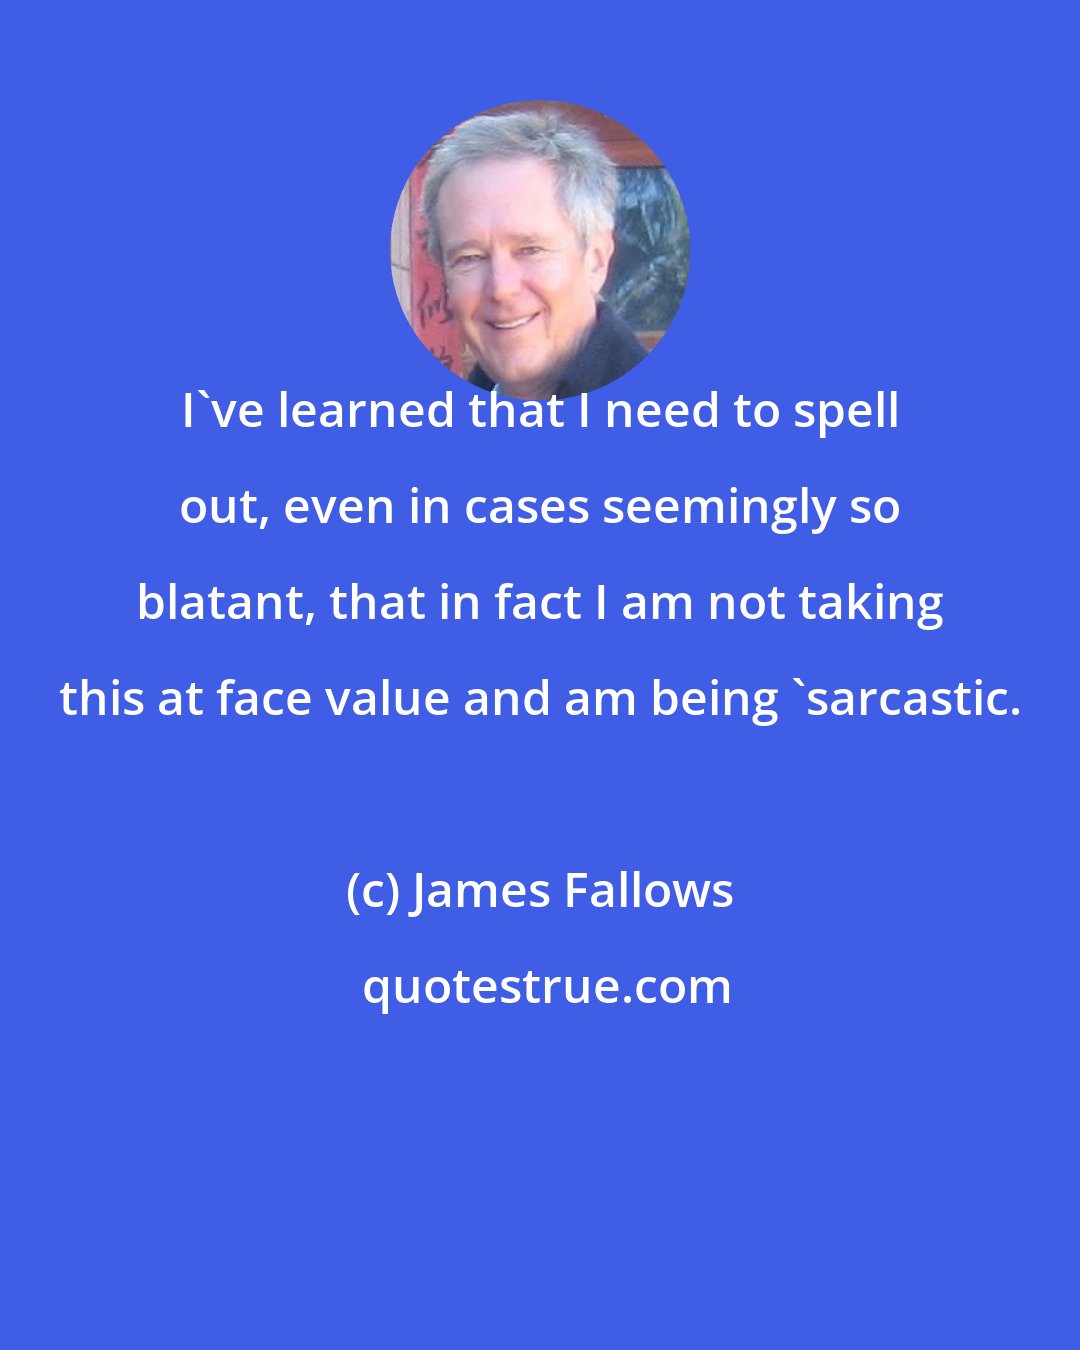 James Fallows: I've learned that I need to spell out, even in cases seemingly so blatant, that in fact I am not taking this at face value and am being 'sarcastic.